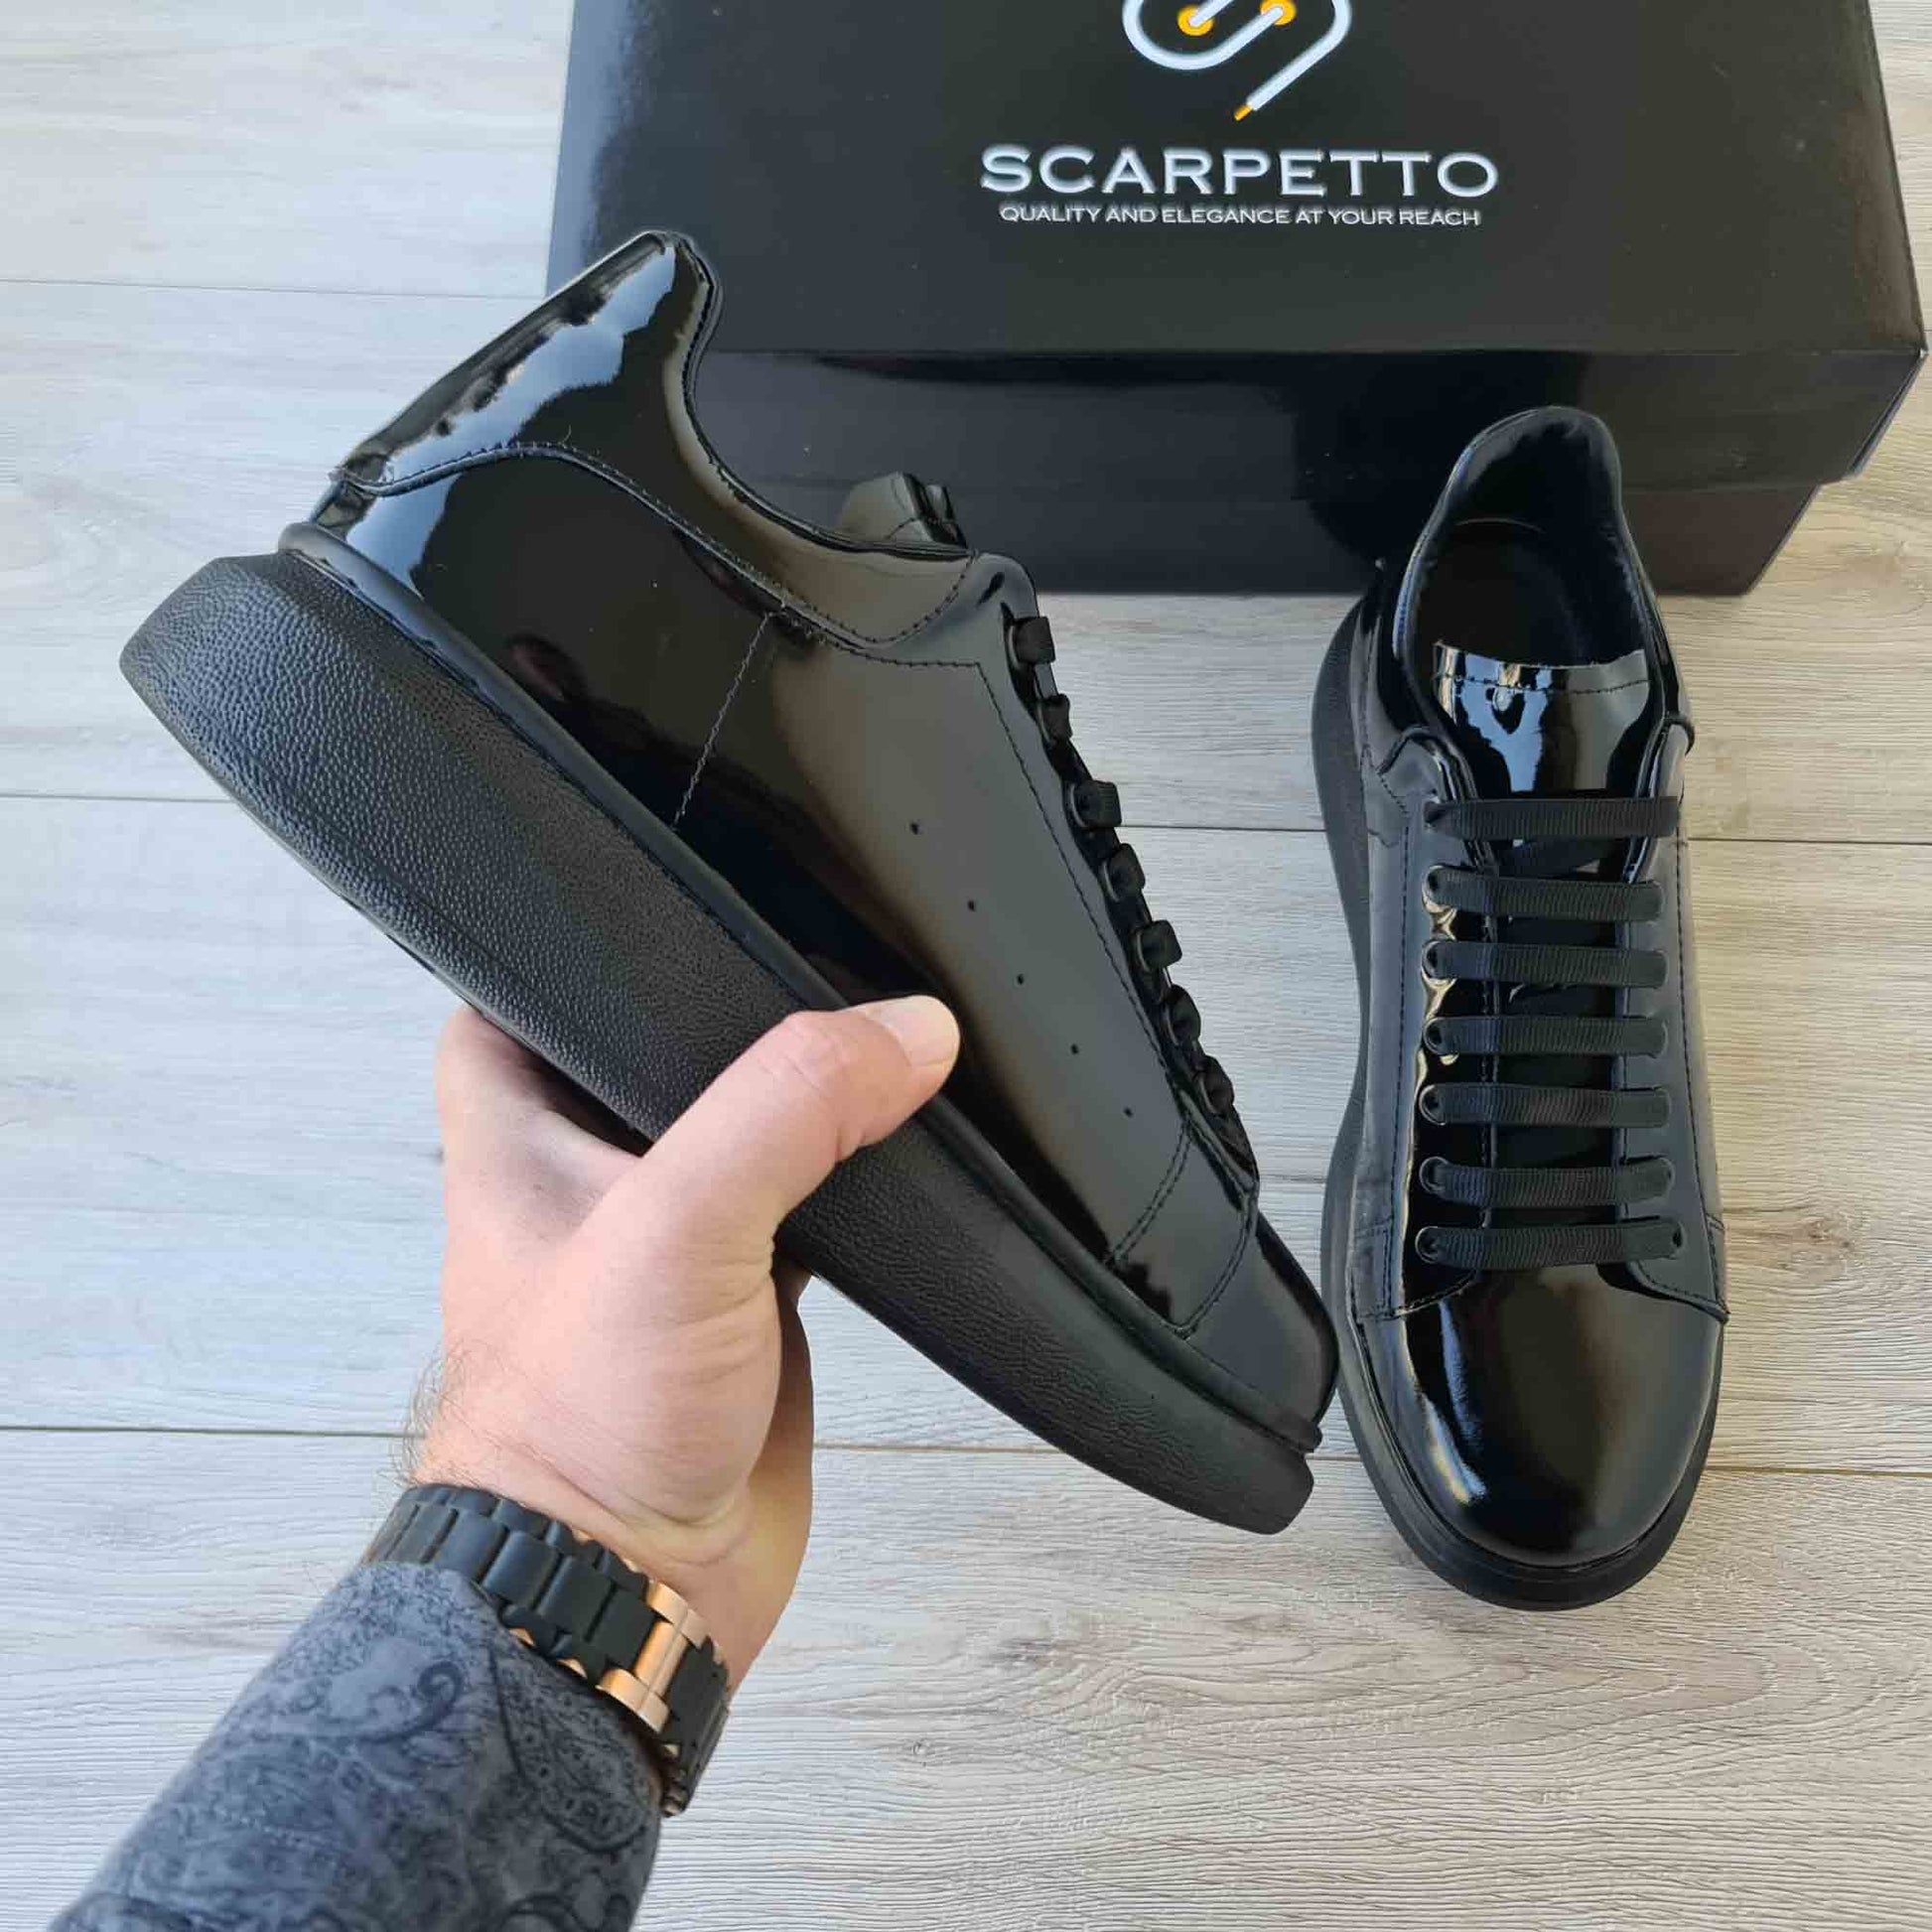 Lift Black Patent Leather Sneakers | Platform High Sole